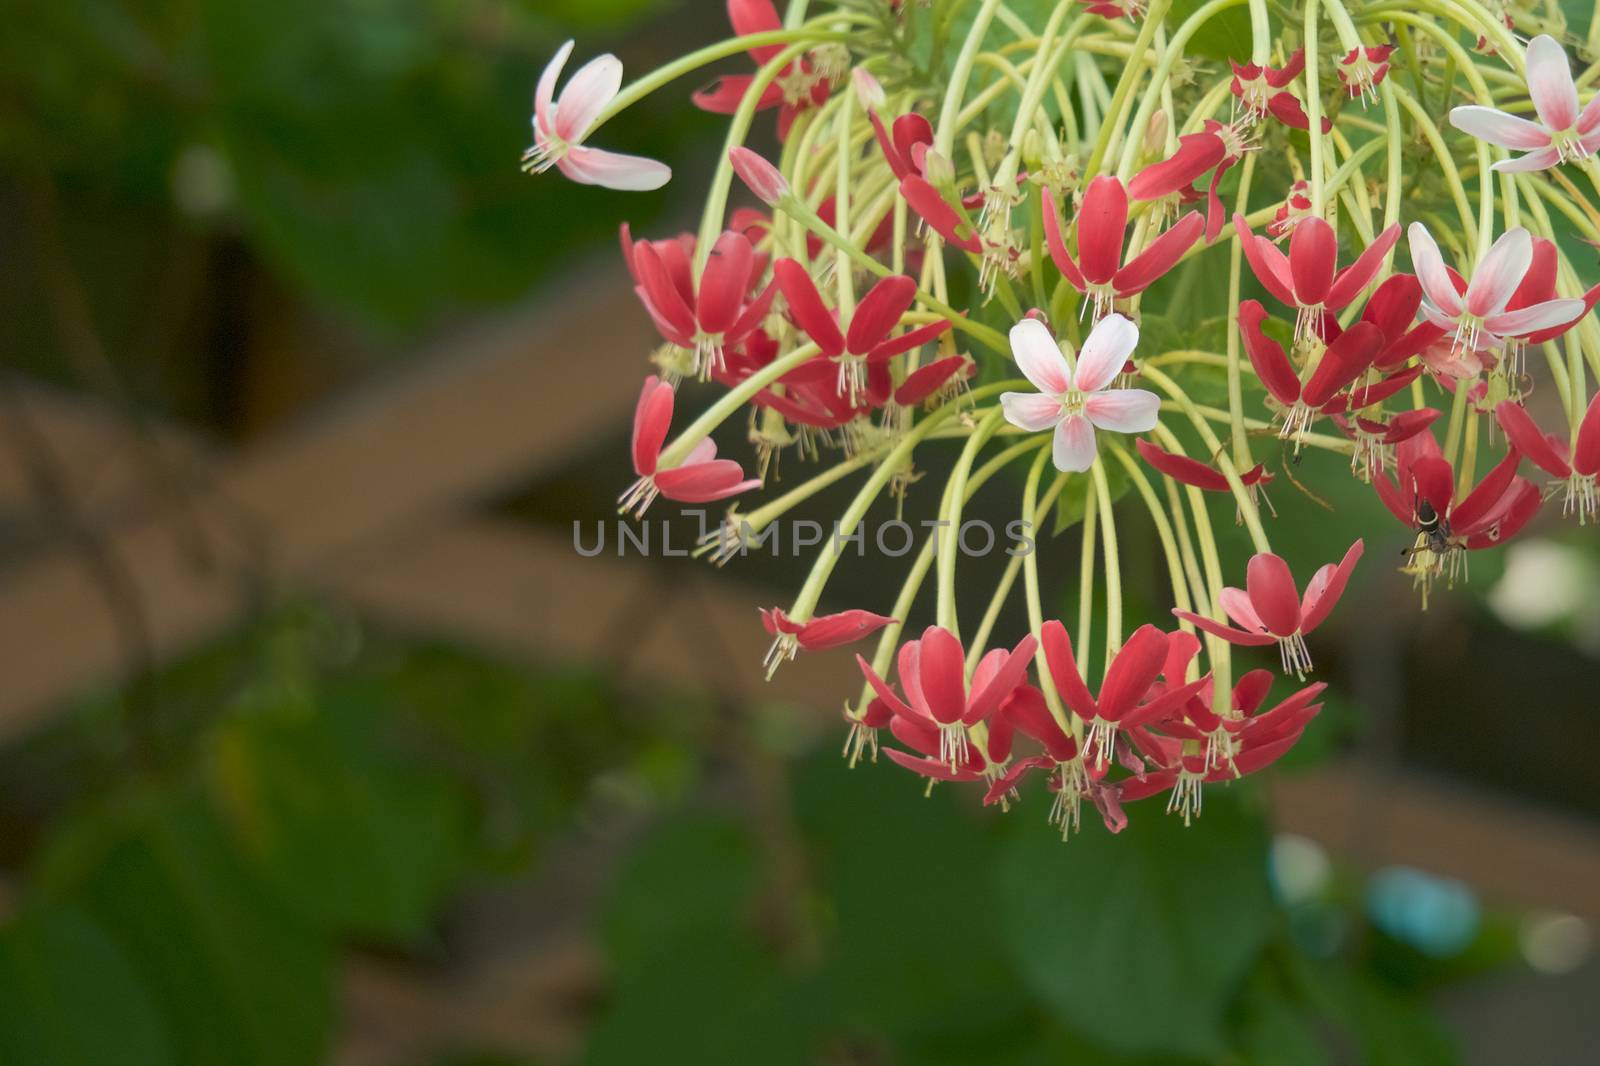 Quisqualis indica or Rangoon Creeper have pink and red flower with green leaves have wooden frame as background.